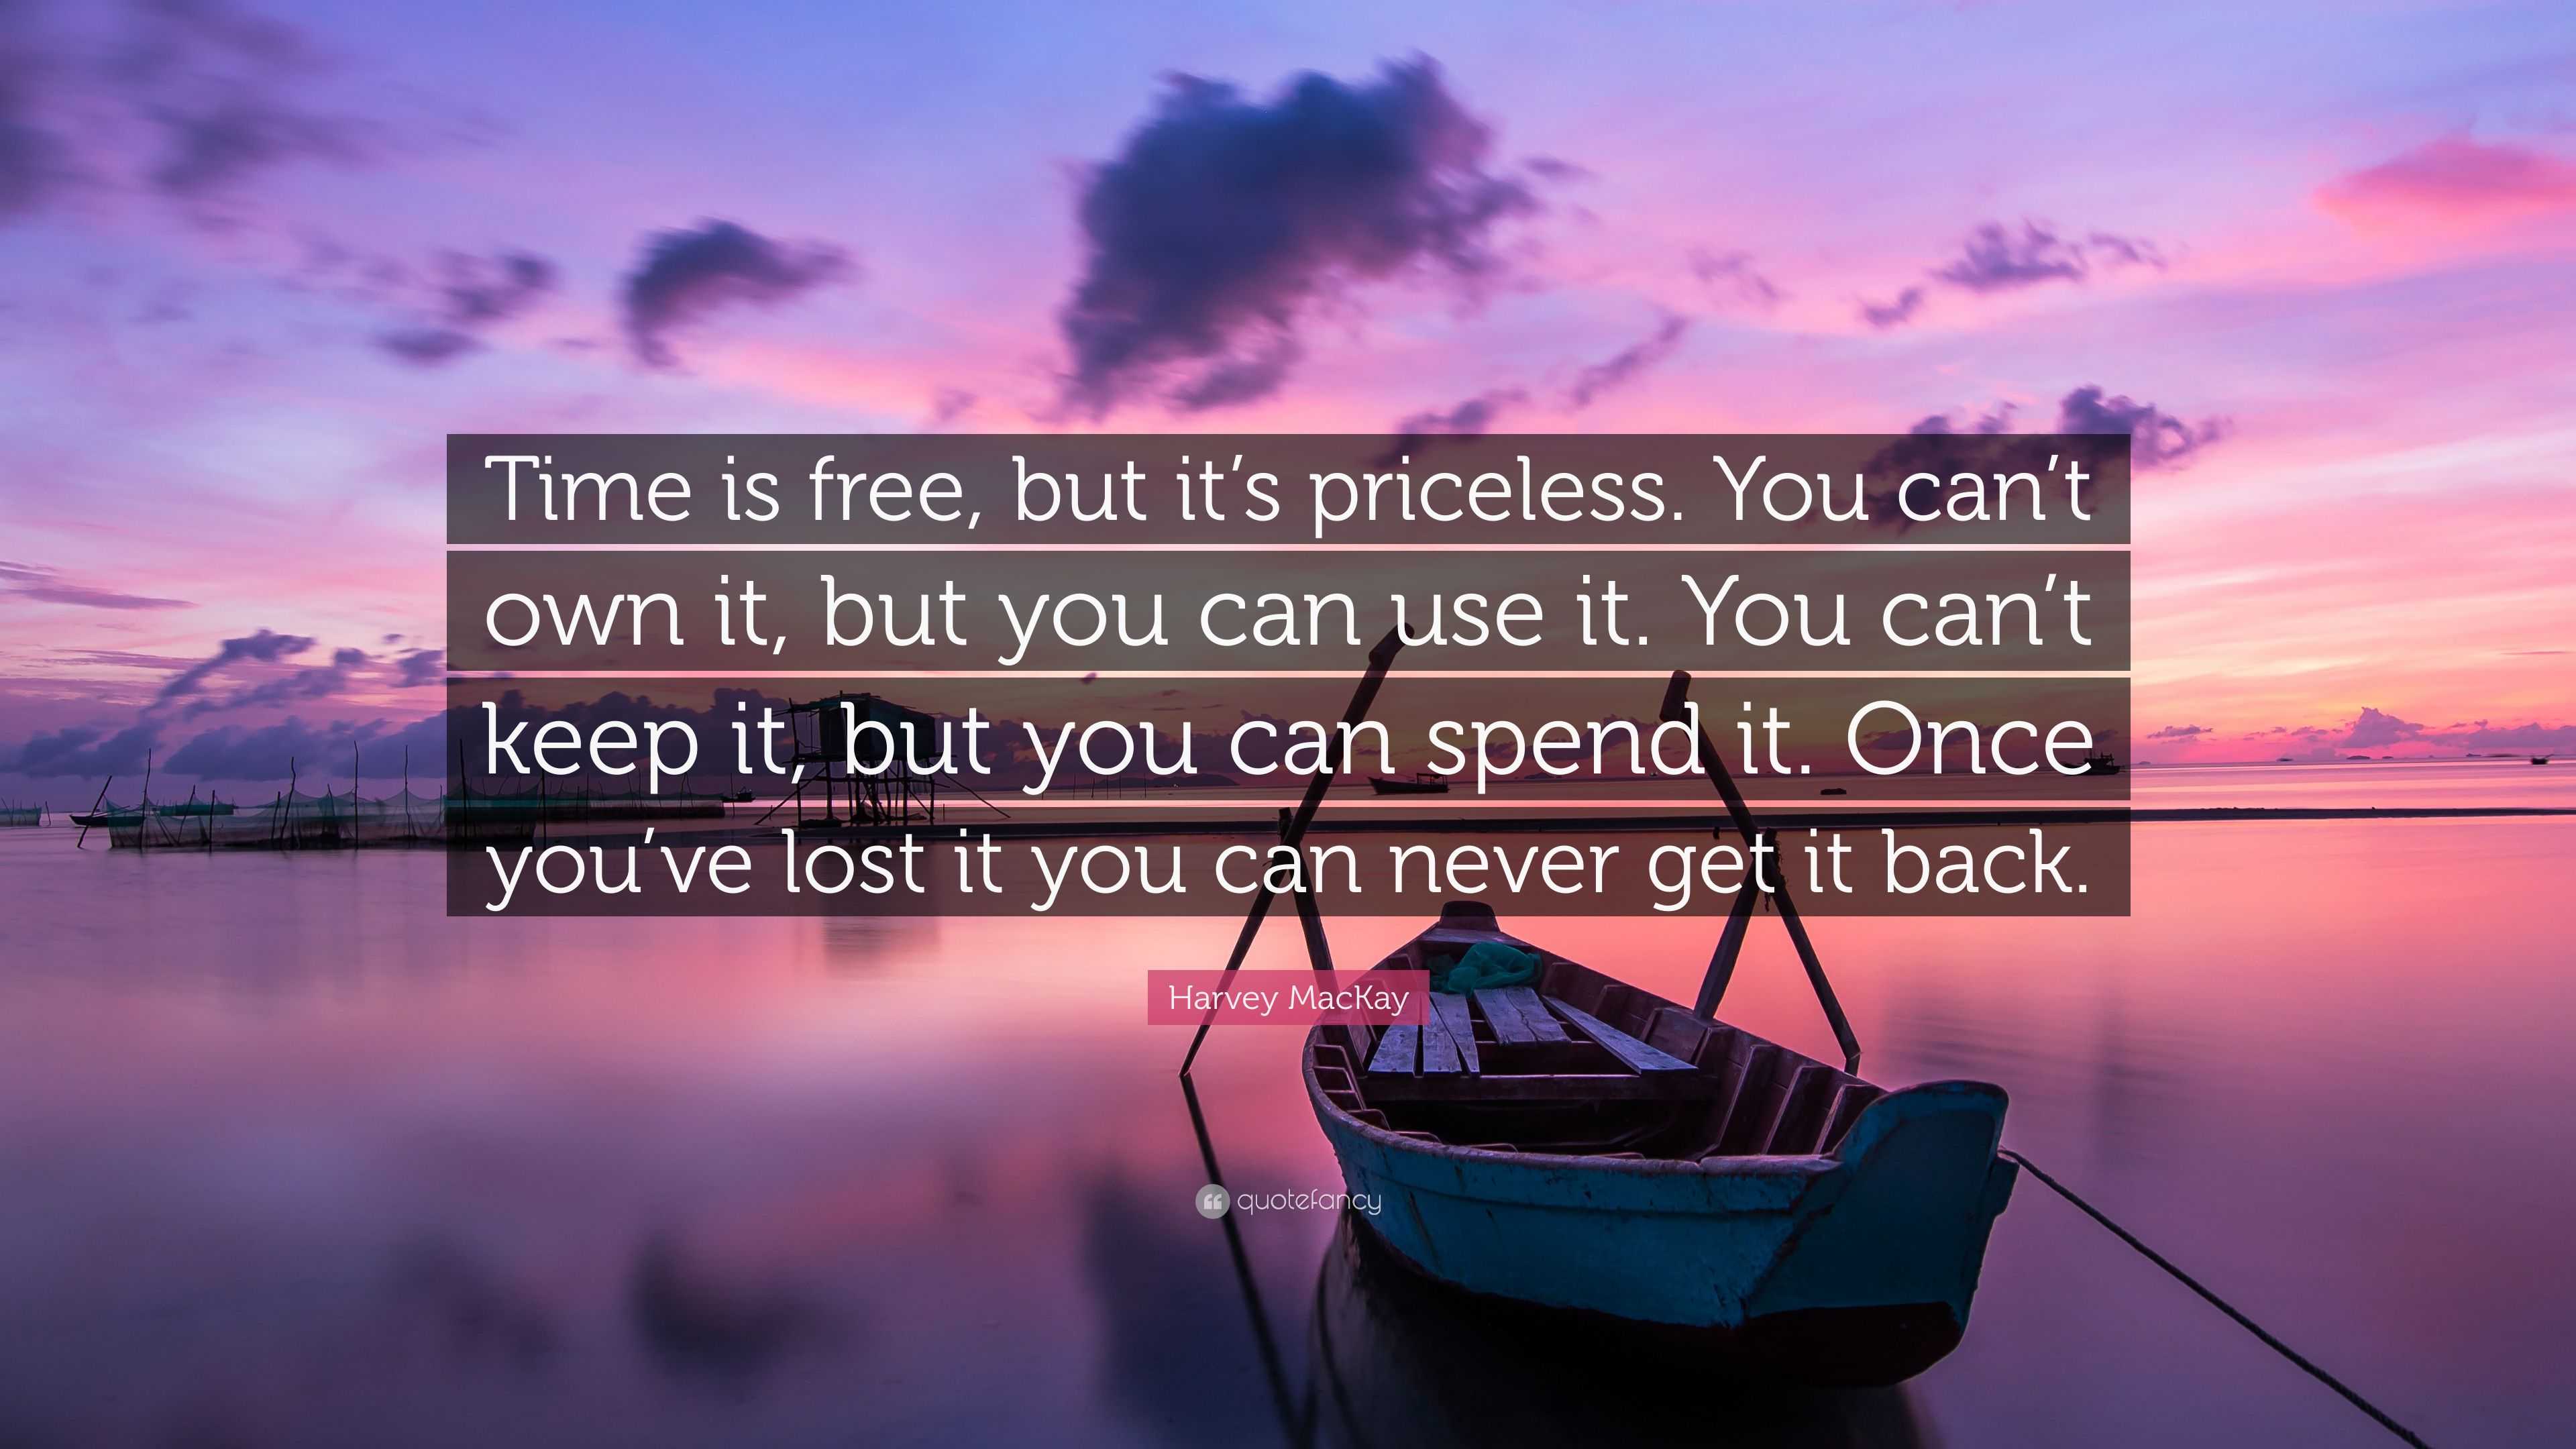 Harvey MacKay Quote: “Time is free, but it’s priceless. You can’t own